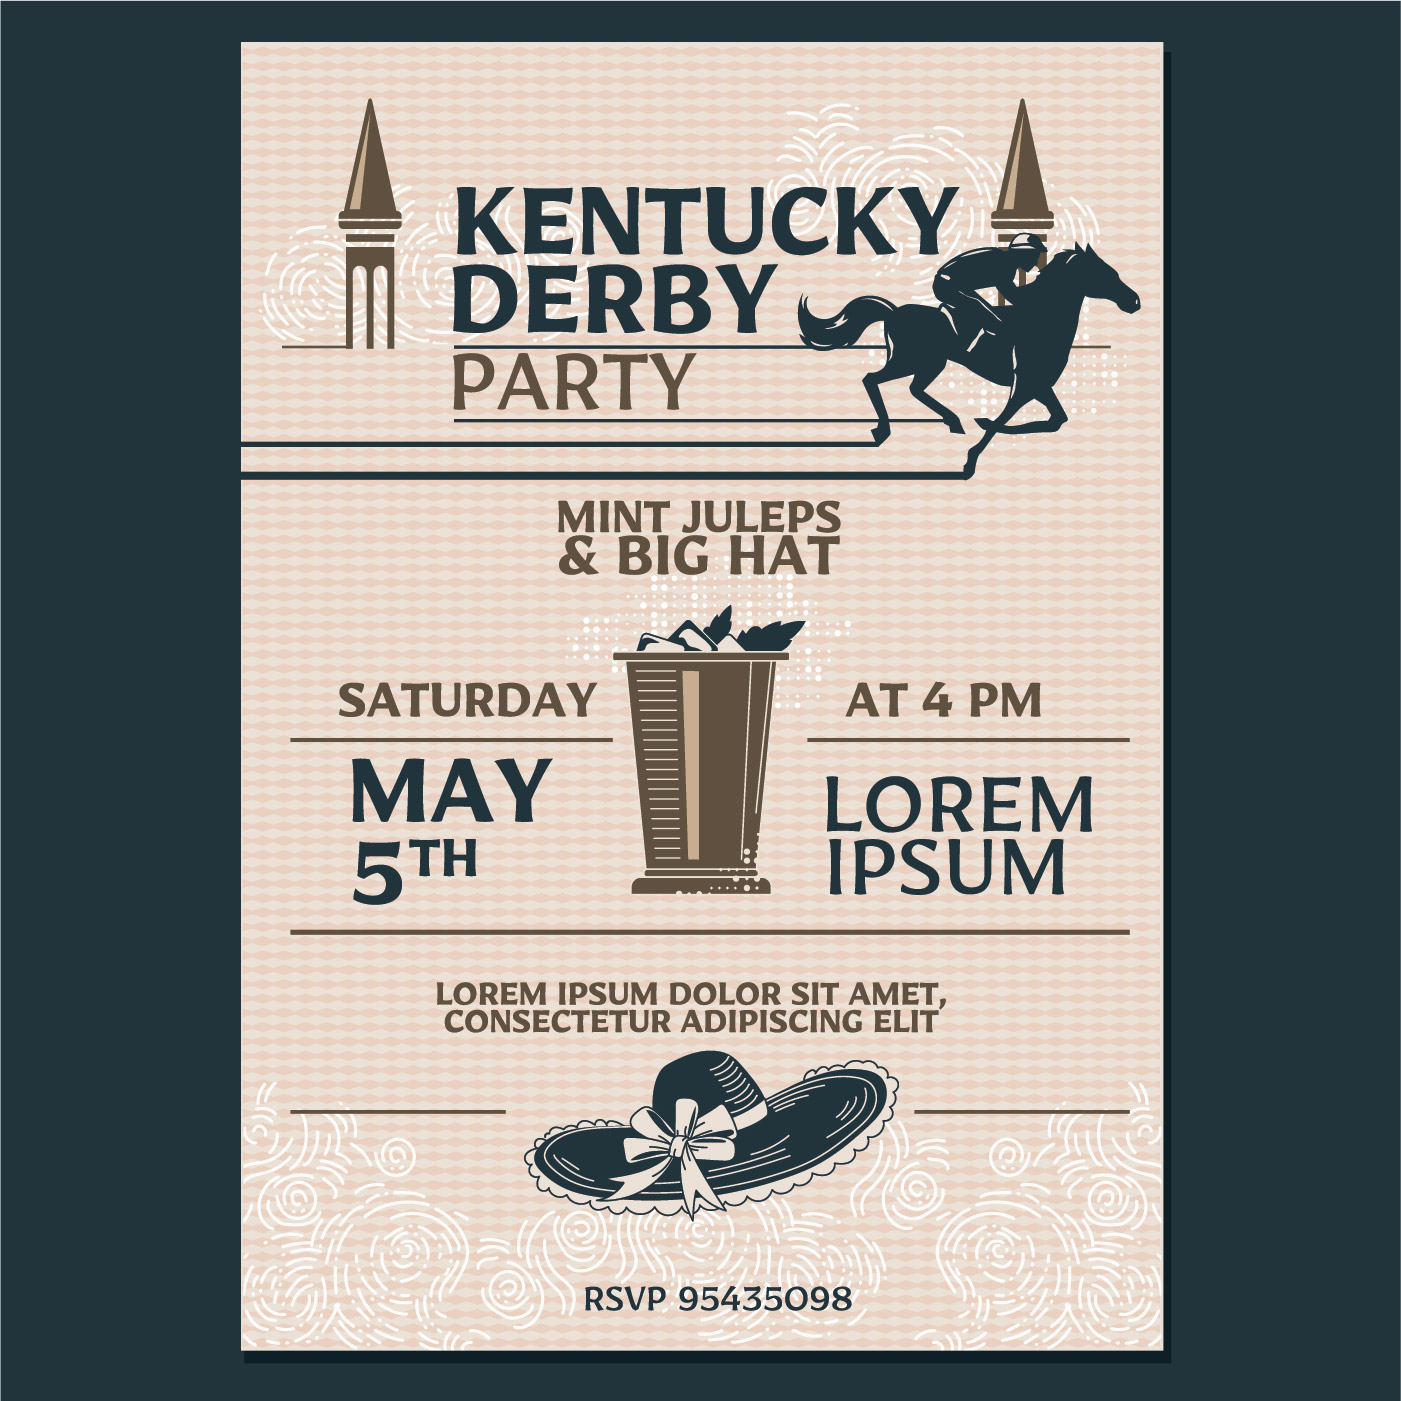 Kentucky derby Party Invitation Classic Style with Geometroc Pattern Background 194958 Vector